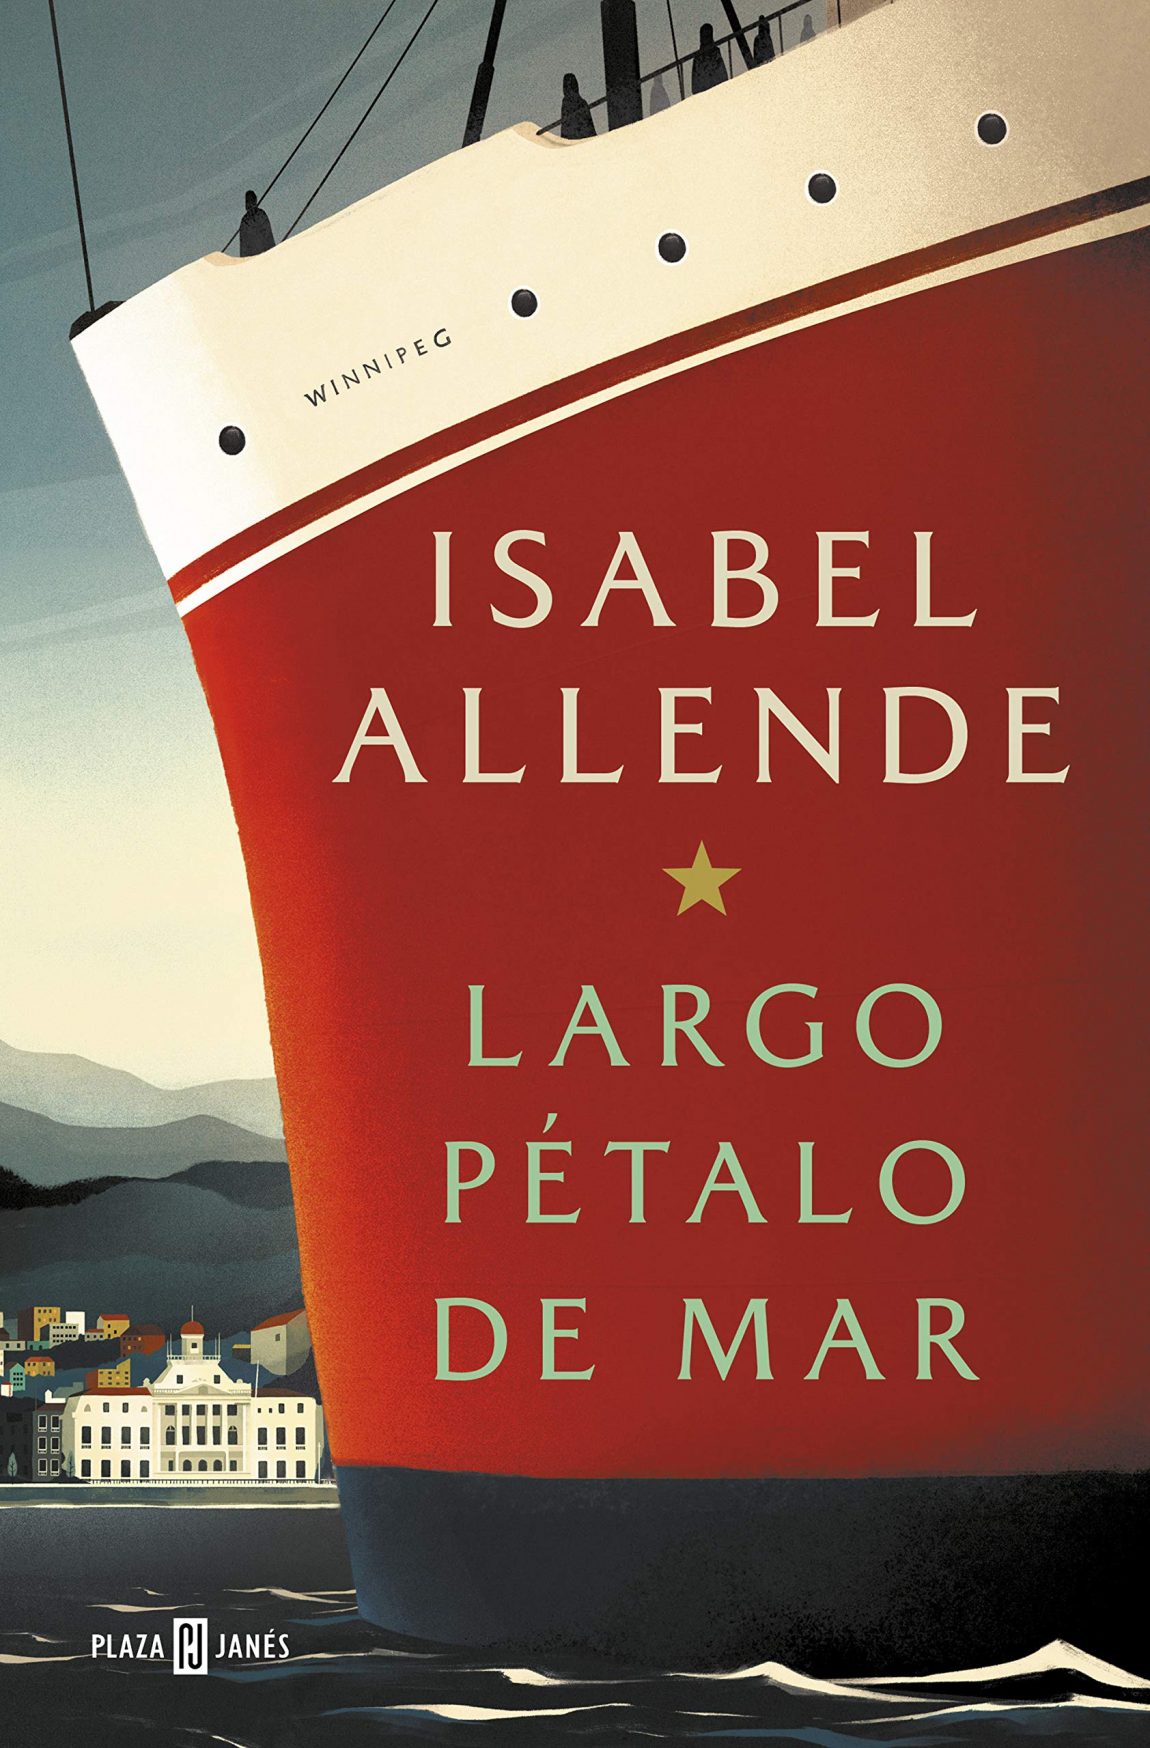 isabel allende a long petal of the sea review